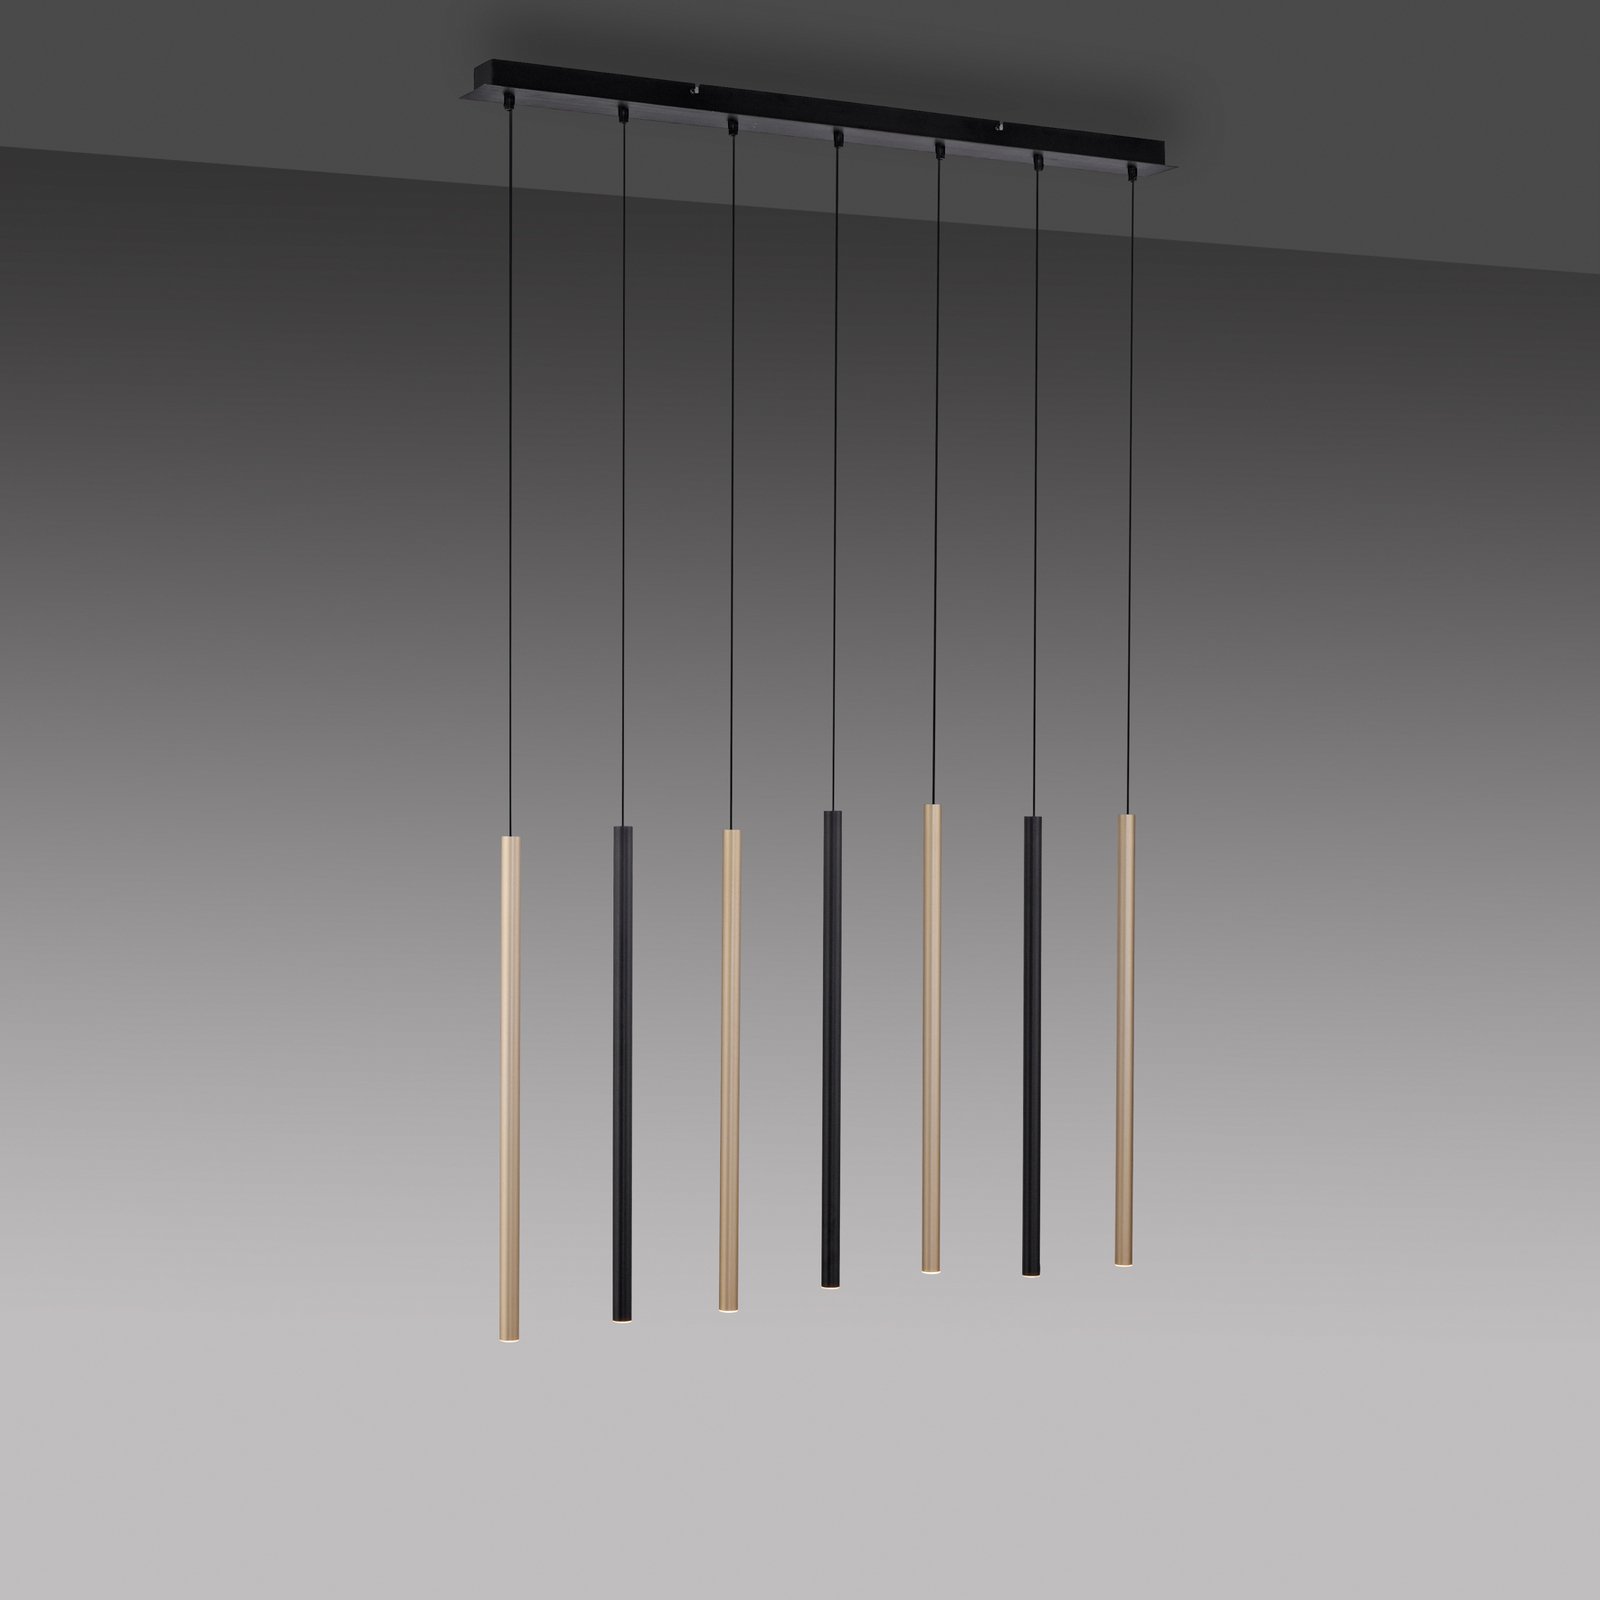 Suspension LED inondation, dimmable, à 7 lampes